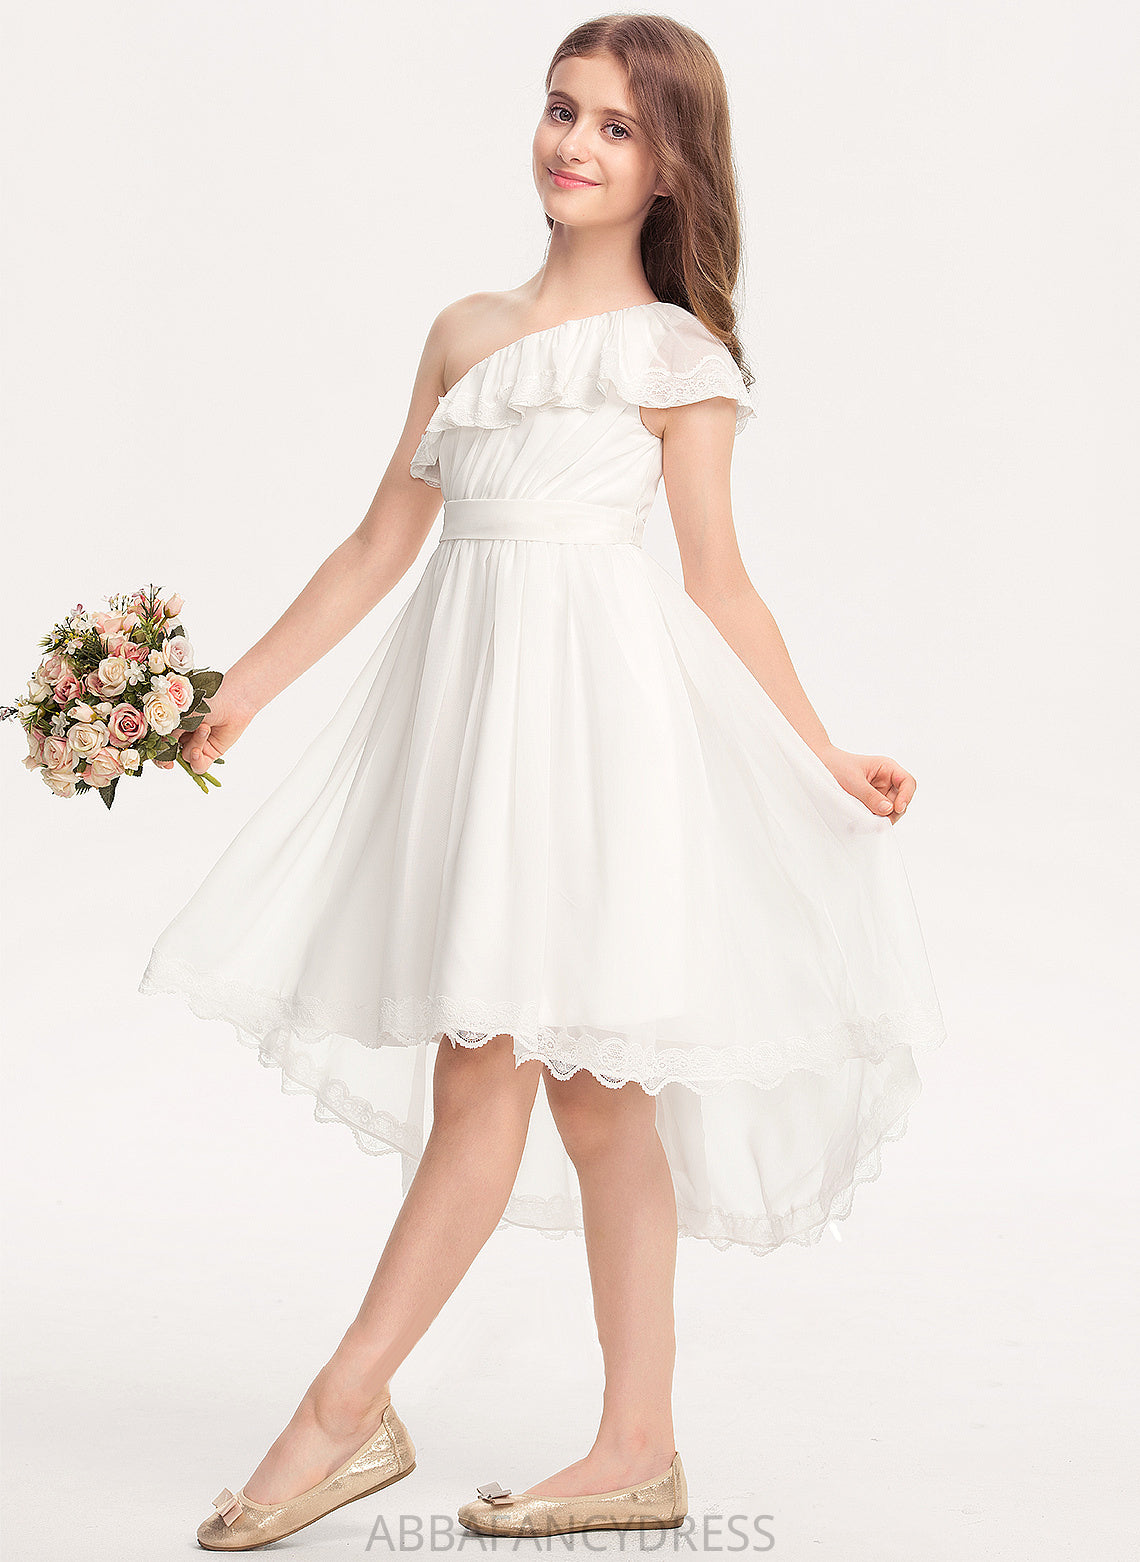 A-Line Chiffon Lace Clarissa Junior Bridesmaid Dresses With Bow(s) Asymmetrical One-Shoulder